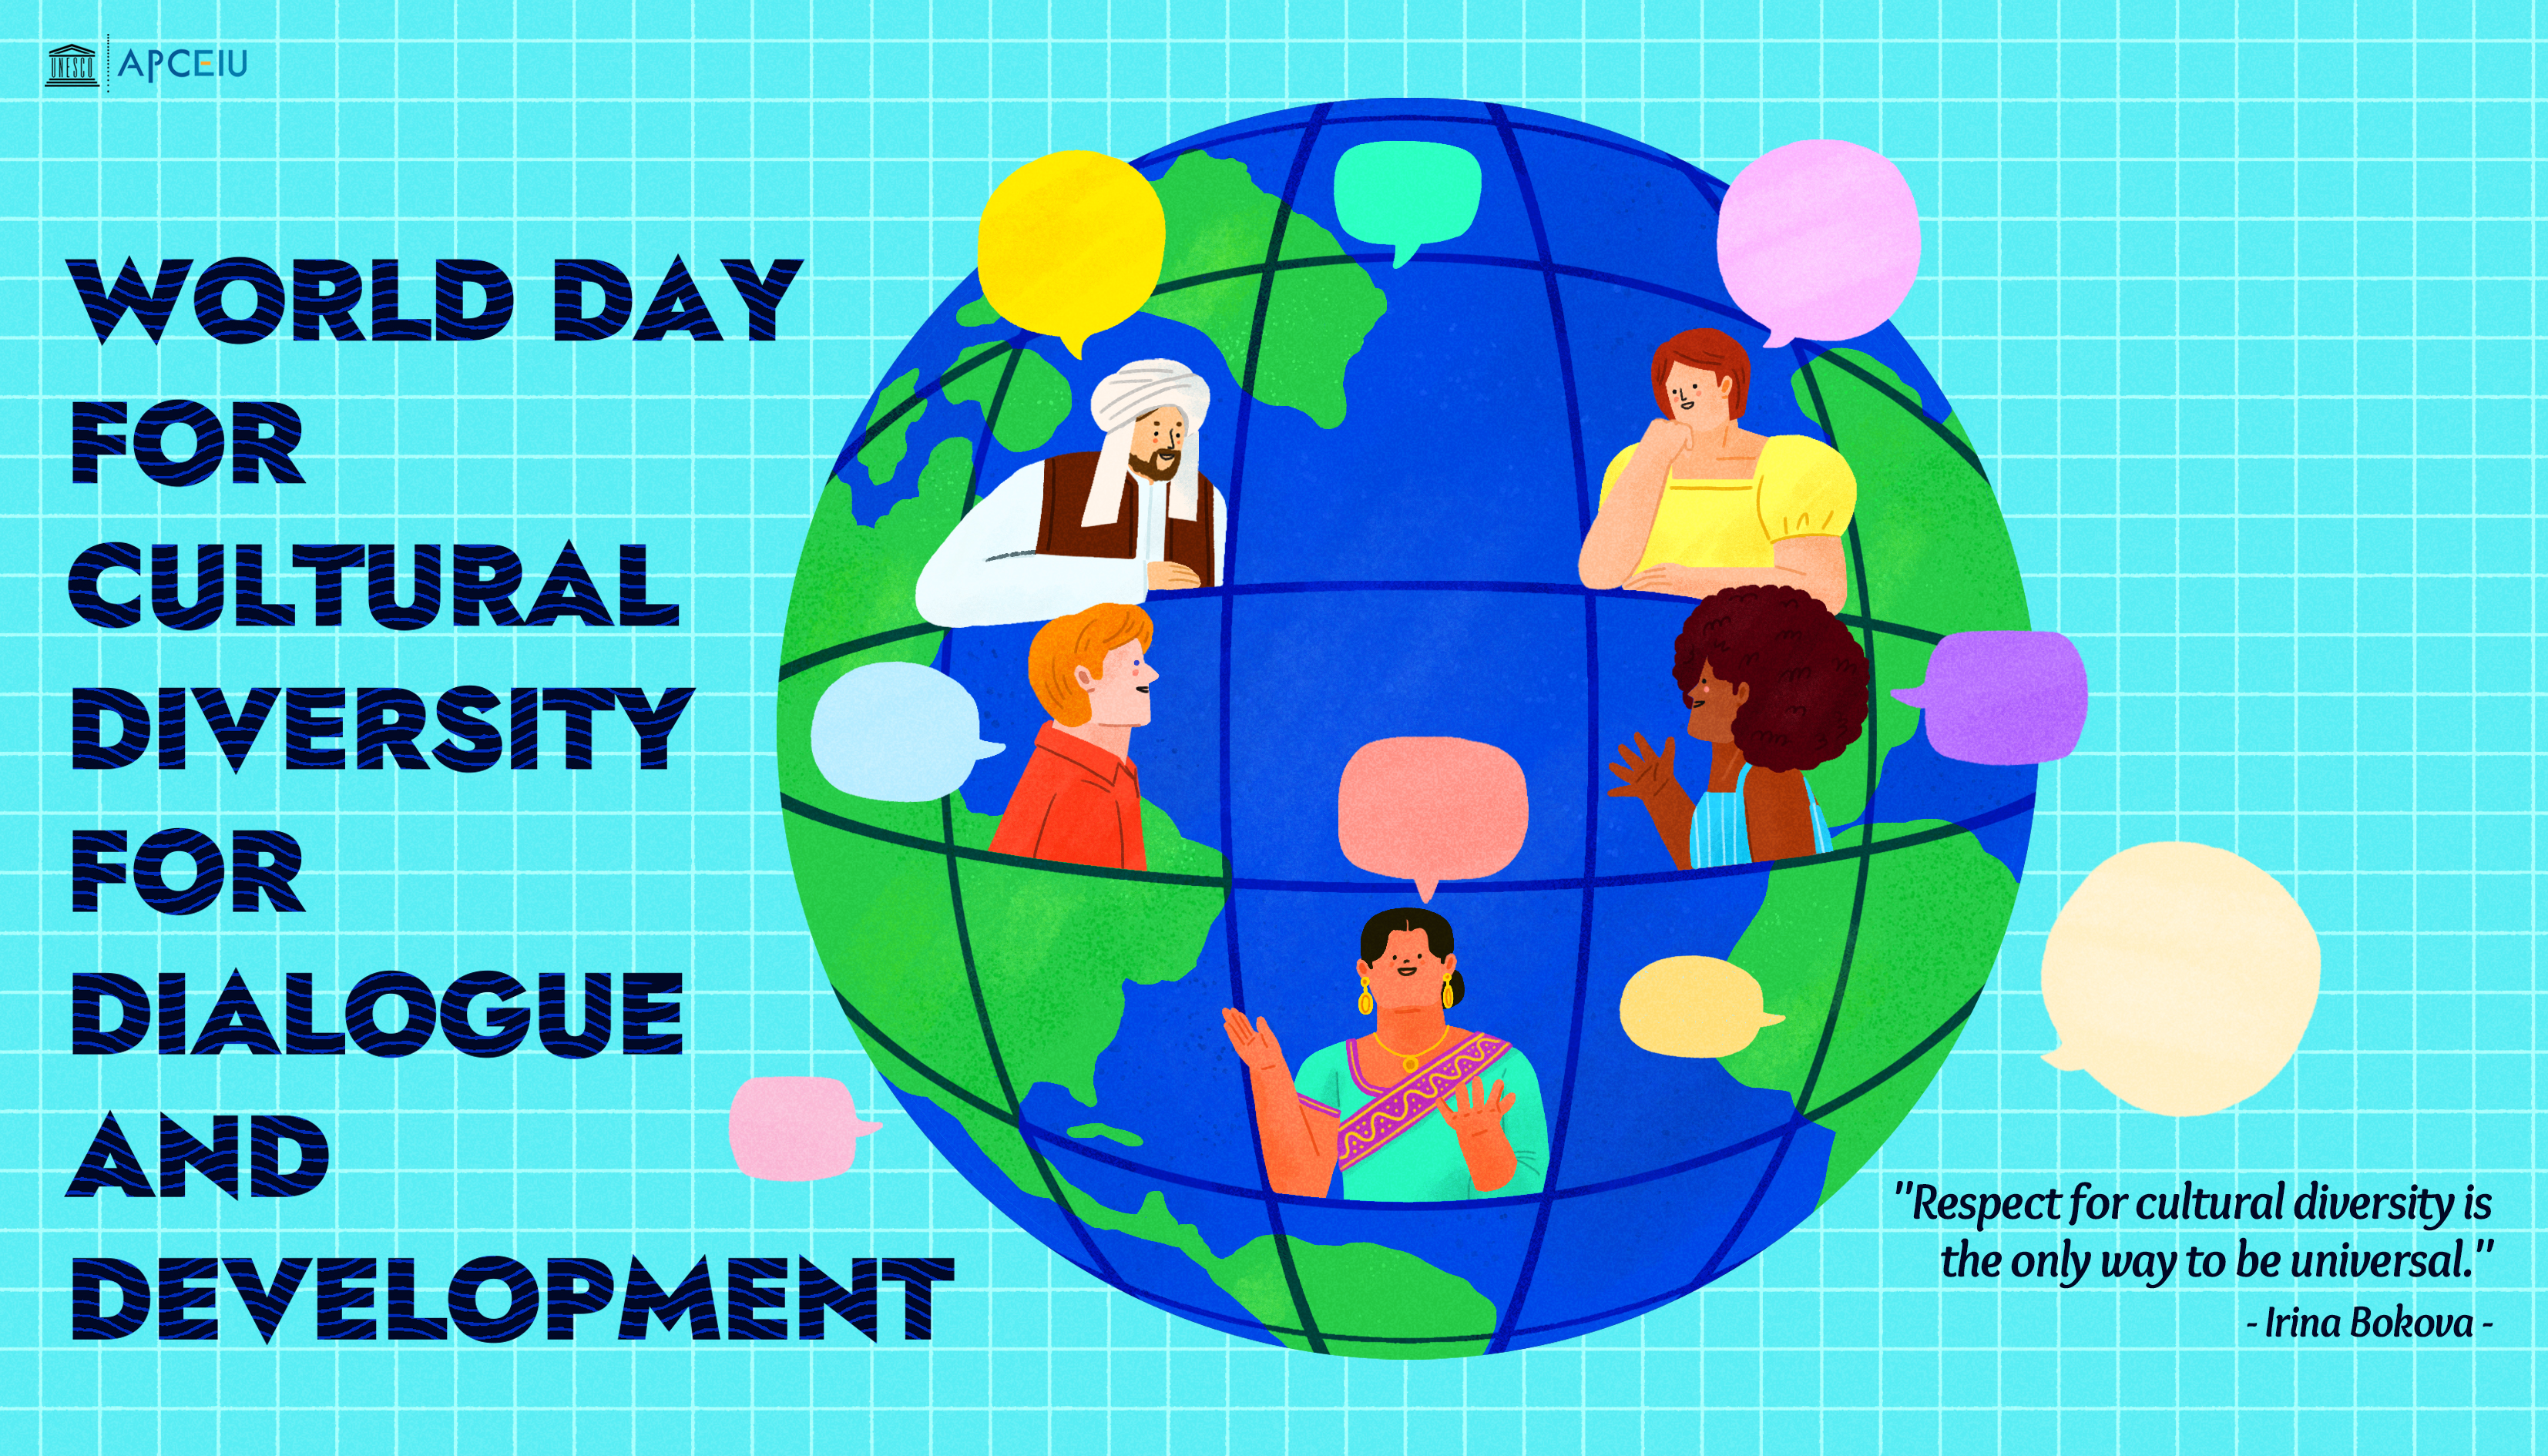 World Day for Cultural Diversity for Dialogue and Development_Illustration.jpg